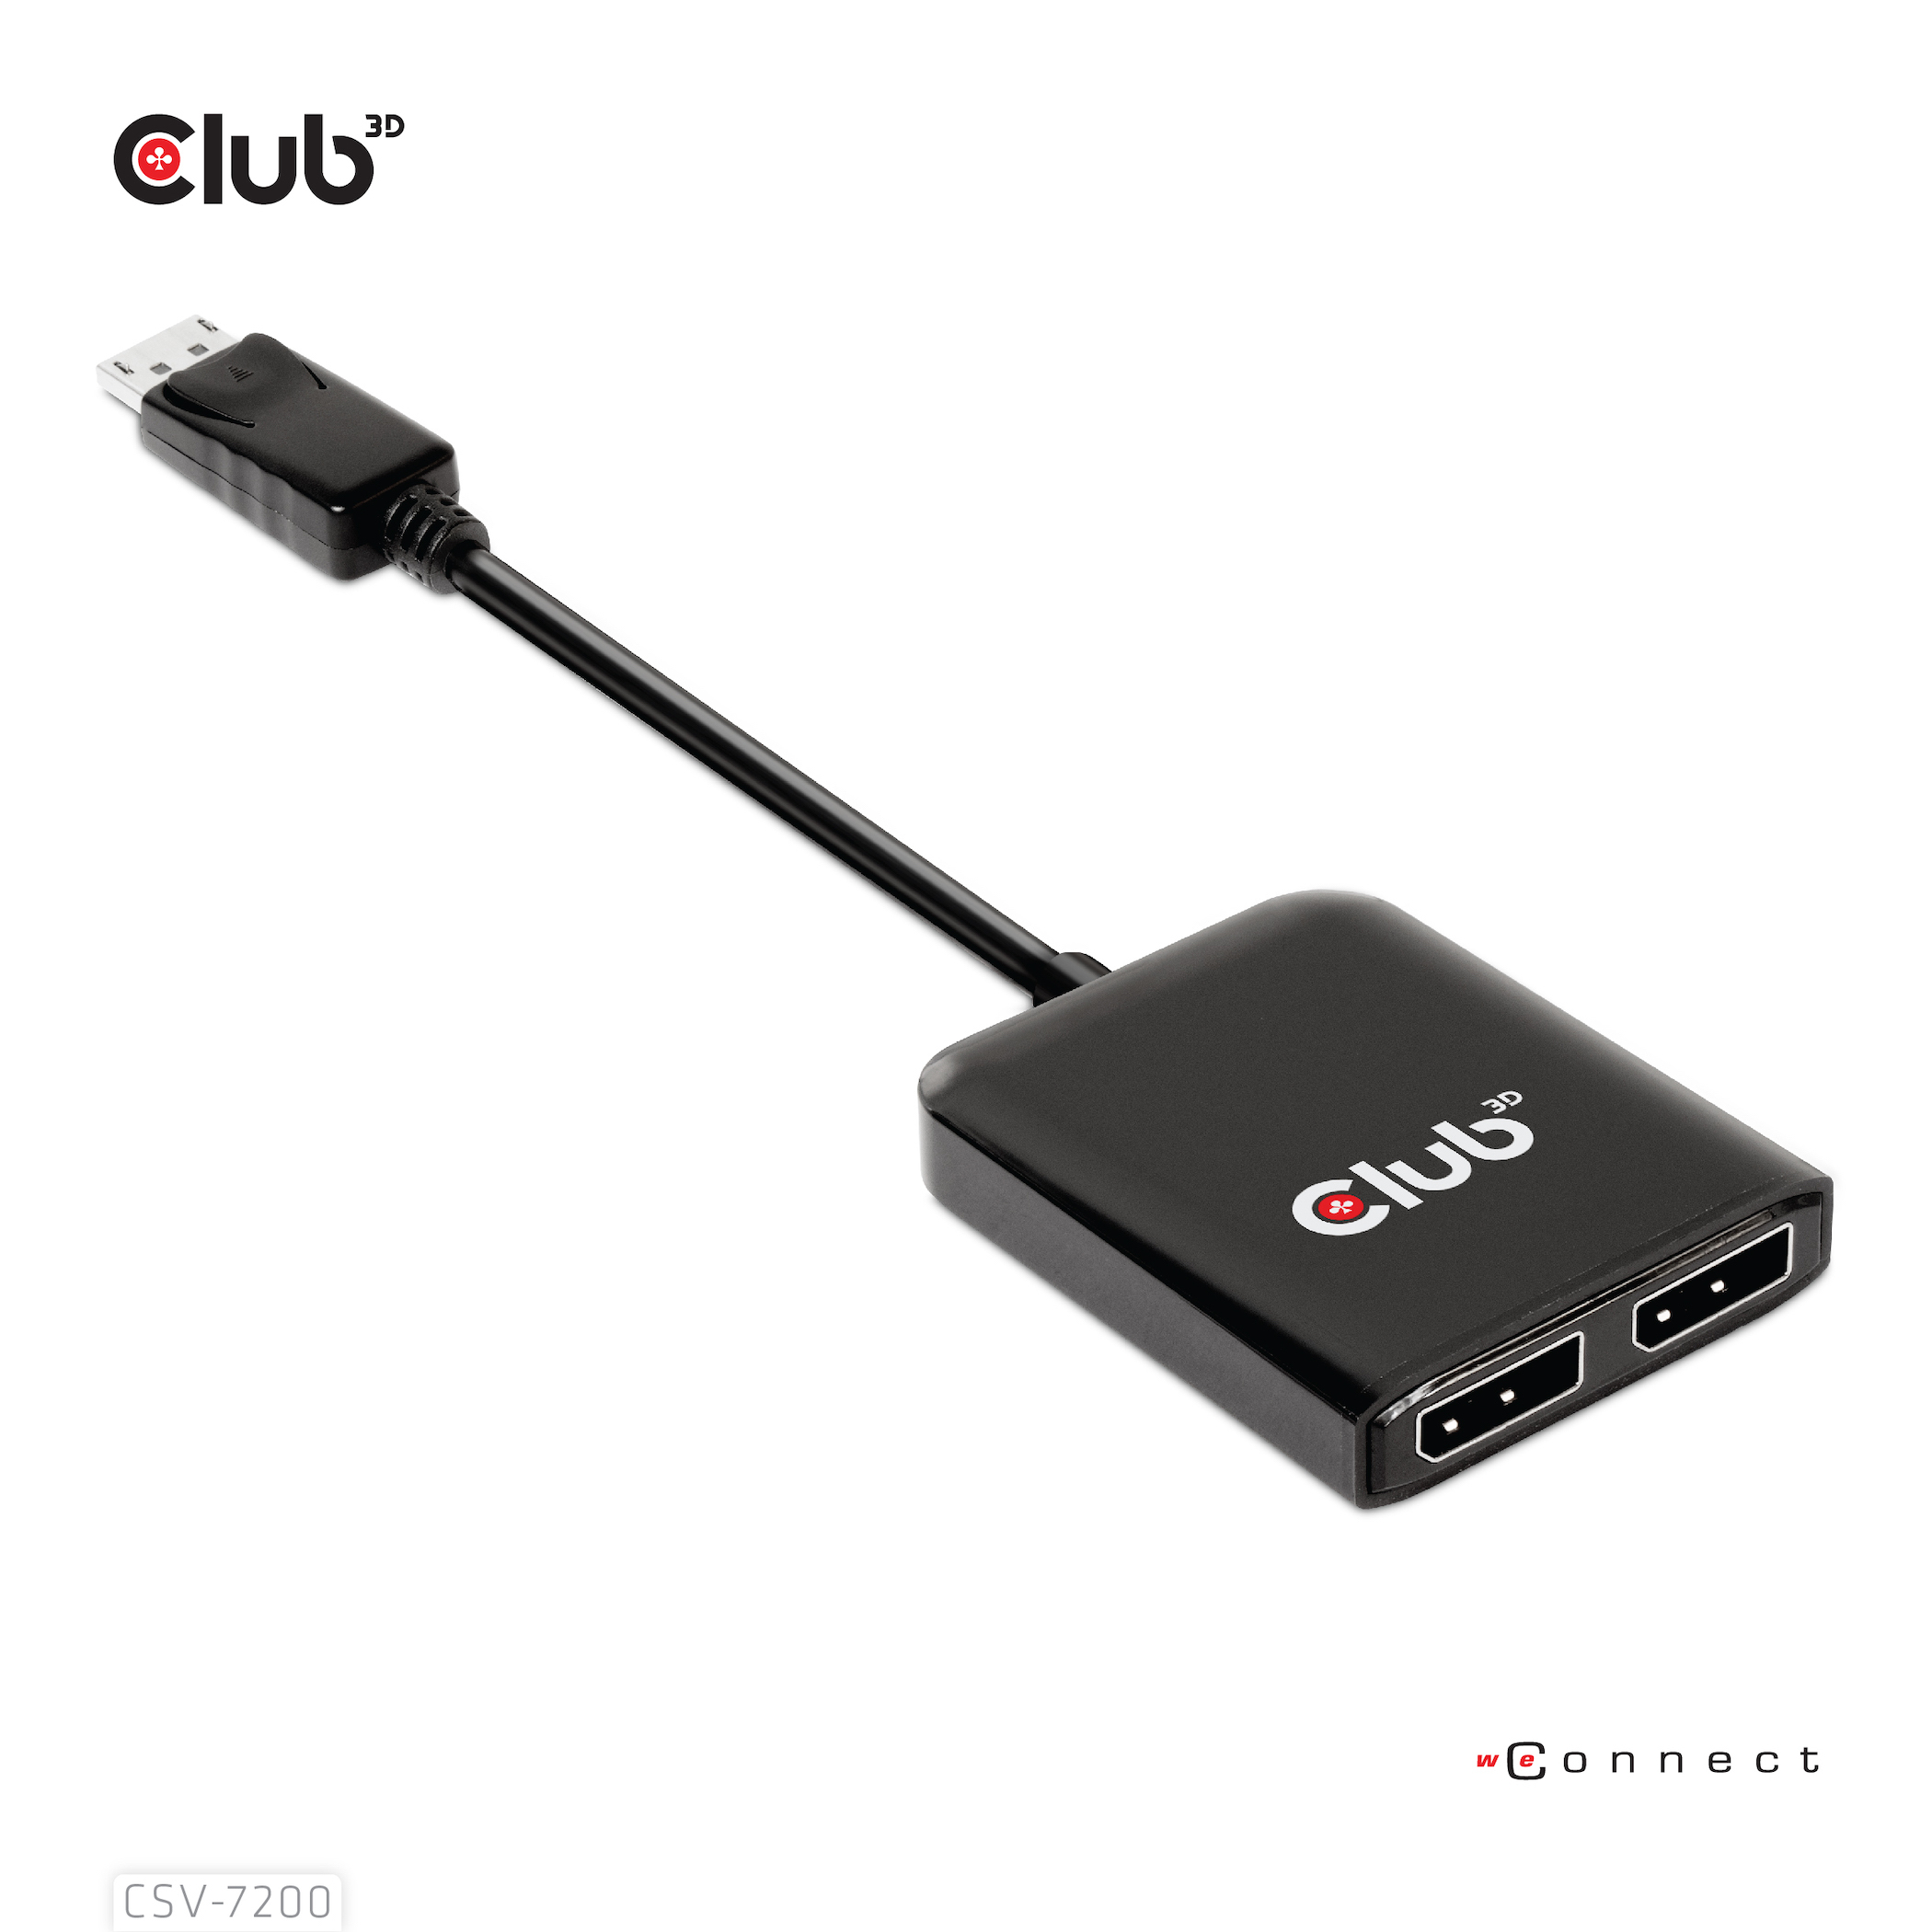 DP 1.4 TO 1 DISPLAYPORT and 1 HDMI SUPPORTS UP TO 2*4K60HZ - USB POWERED